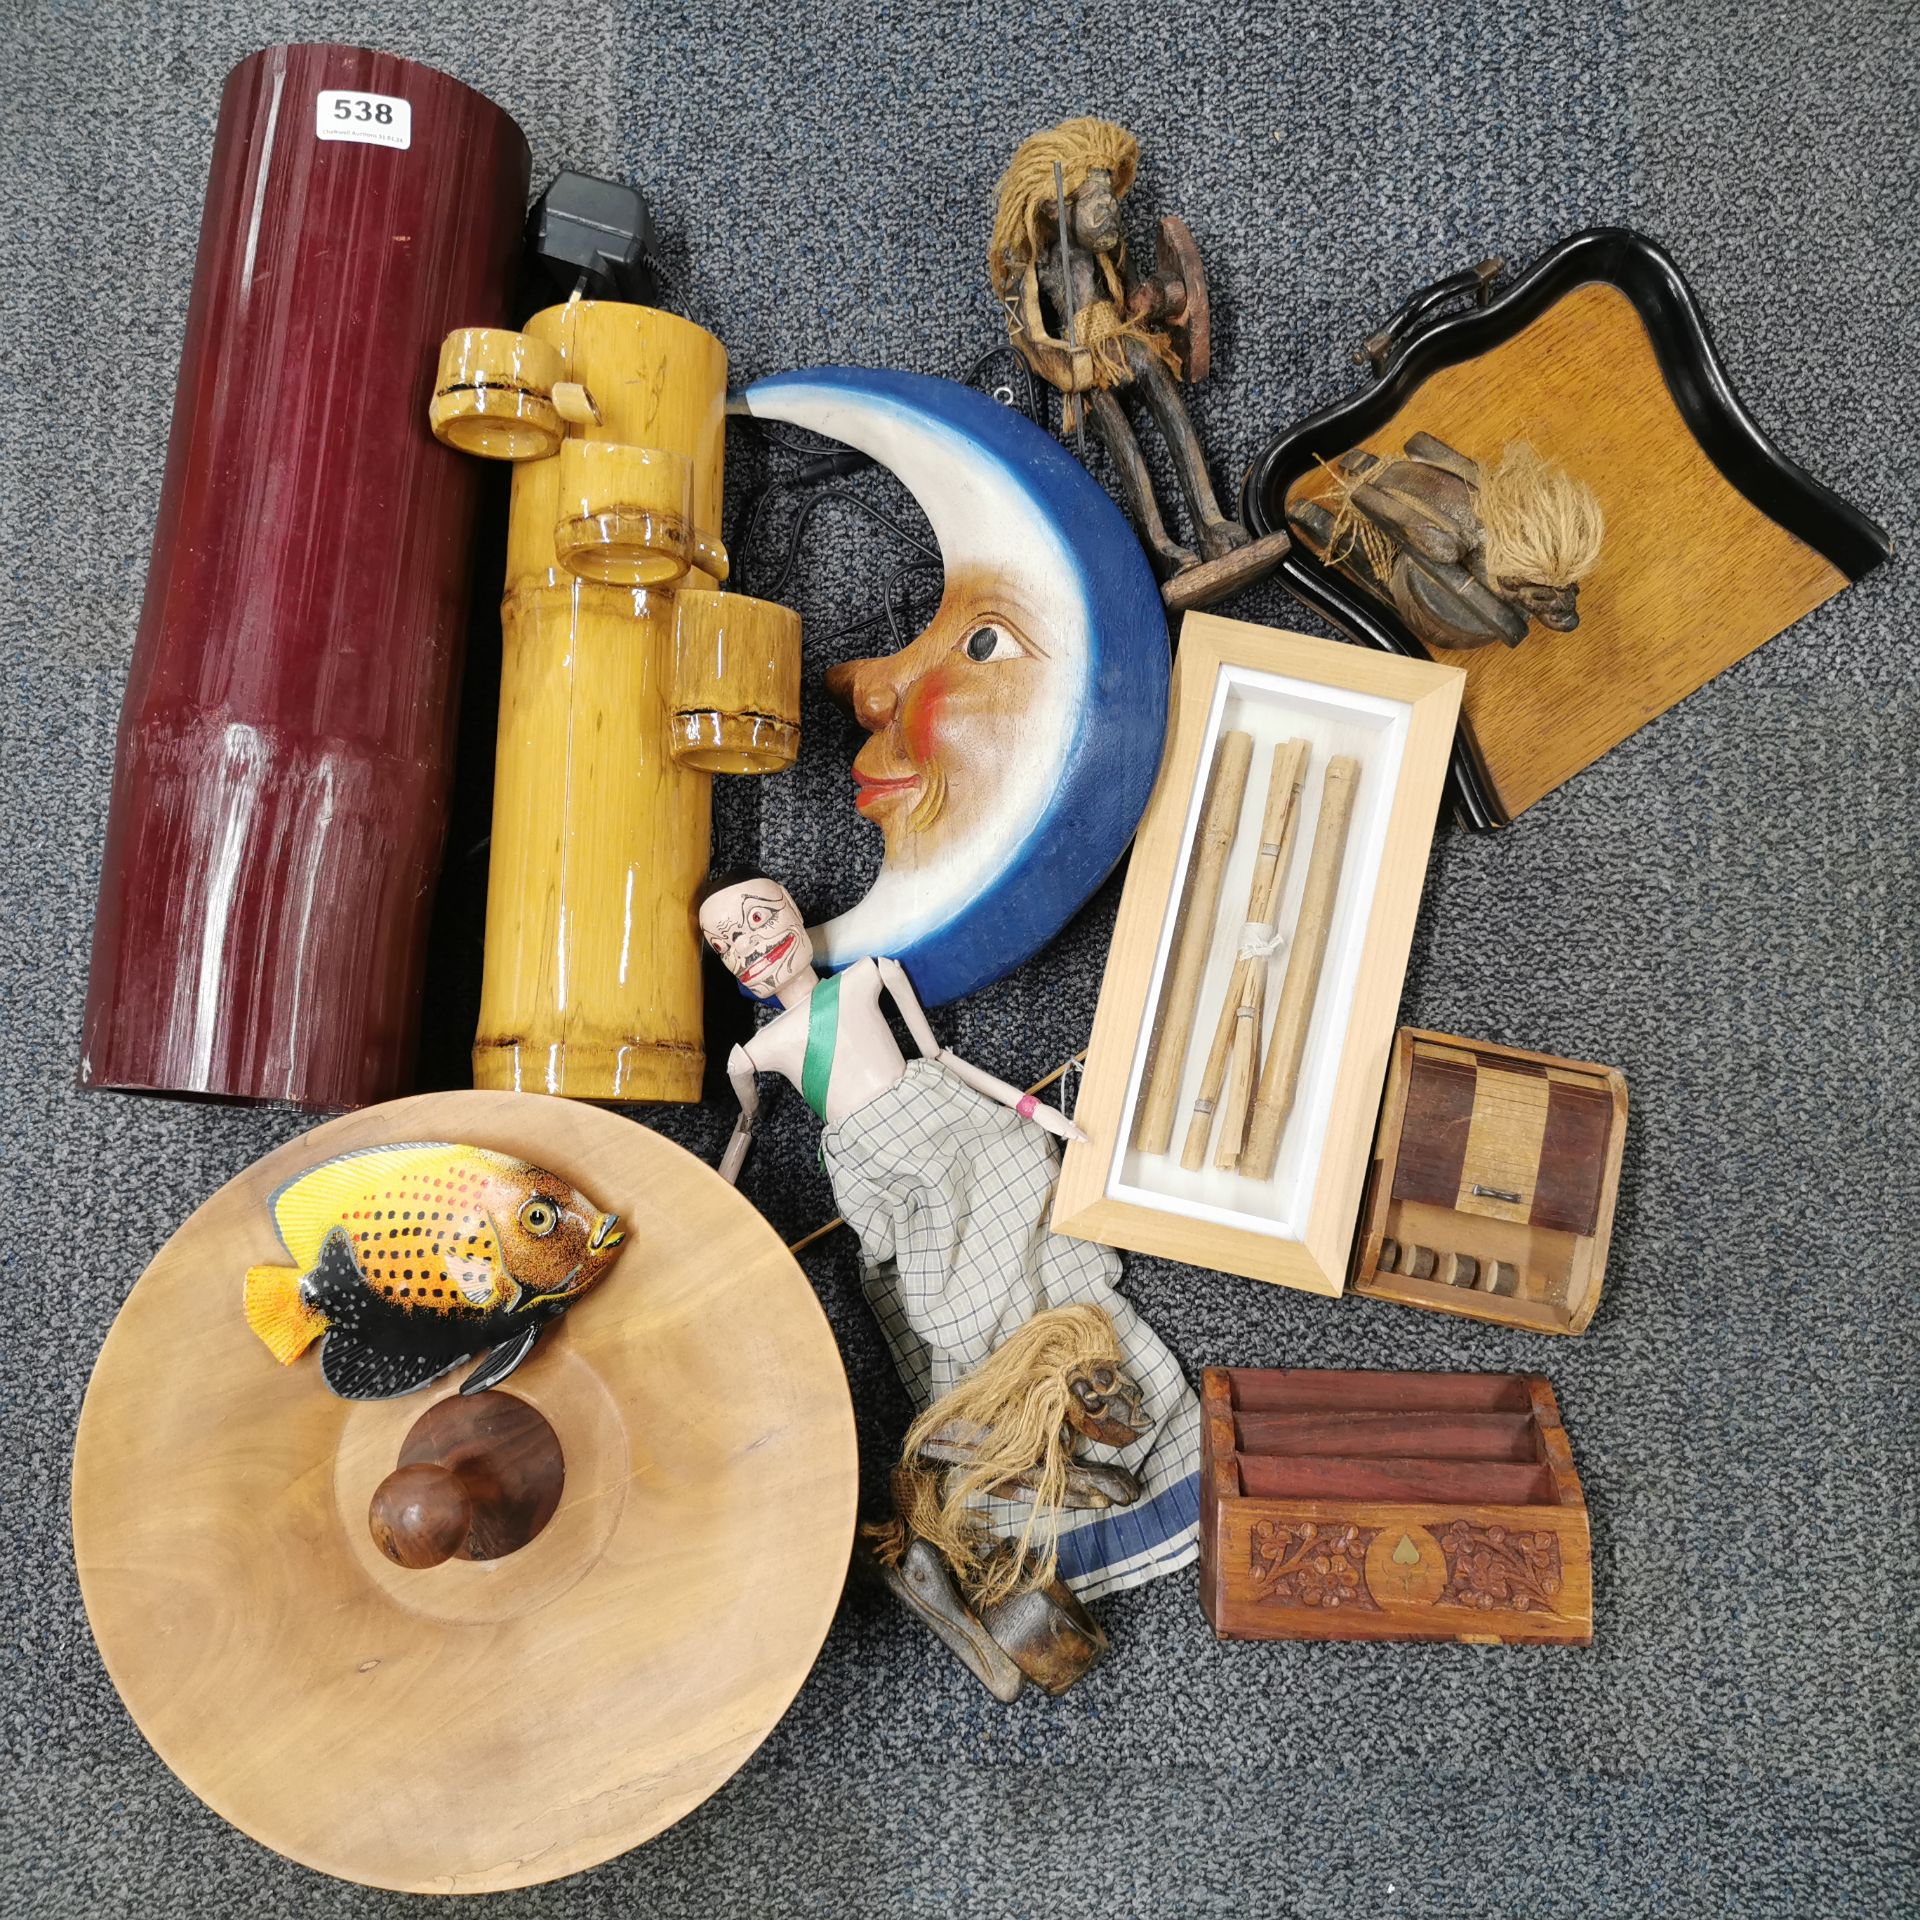 A quantity of bamboo and wooden items.